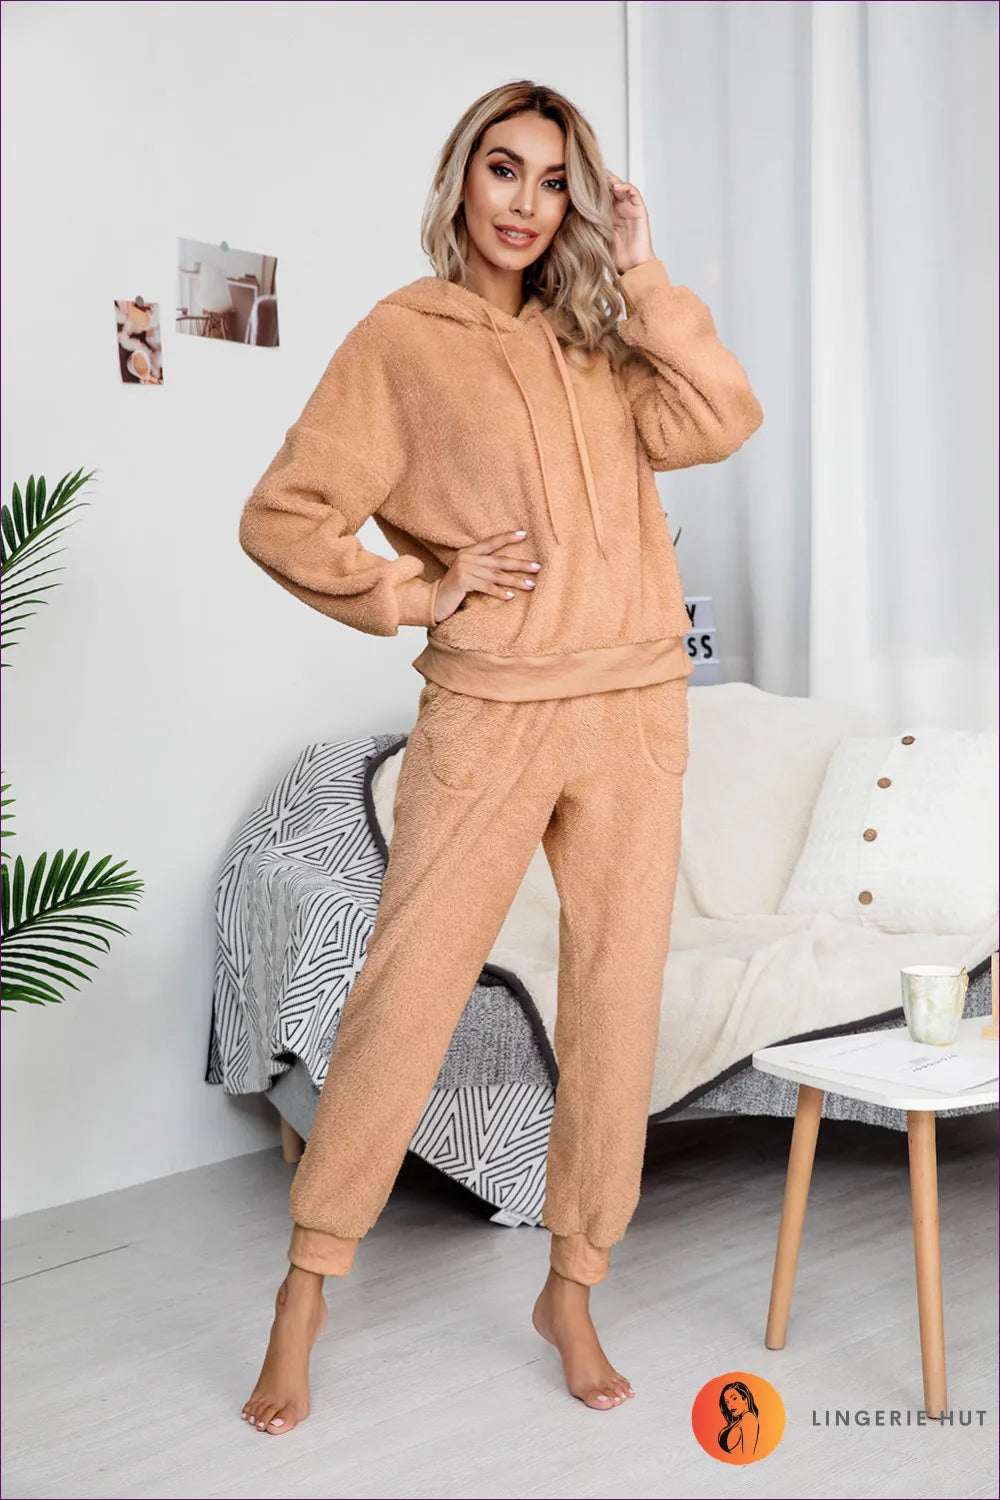 Stay Warm And Cozy In Our Fleece Hooded Pyjama Sets. Crafted For Comfort, They’ll Keep You Snug On Chilly